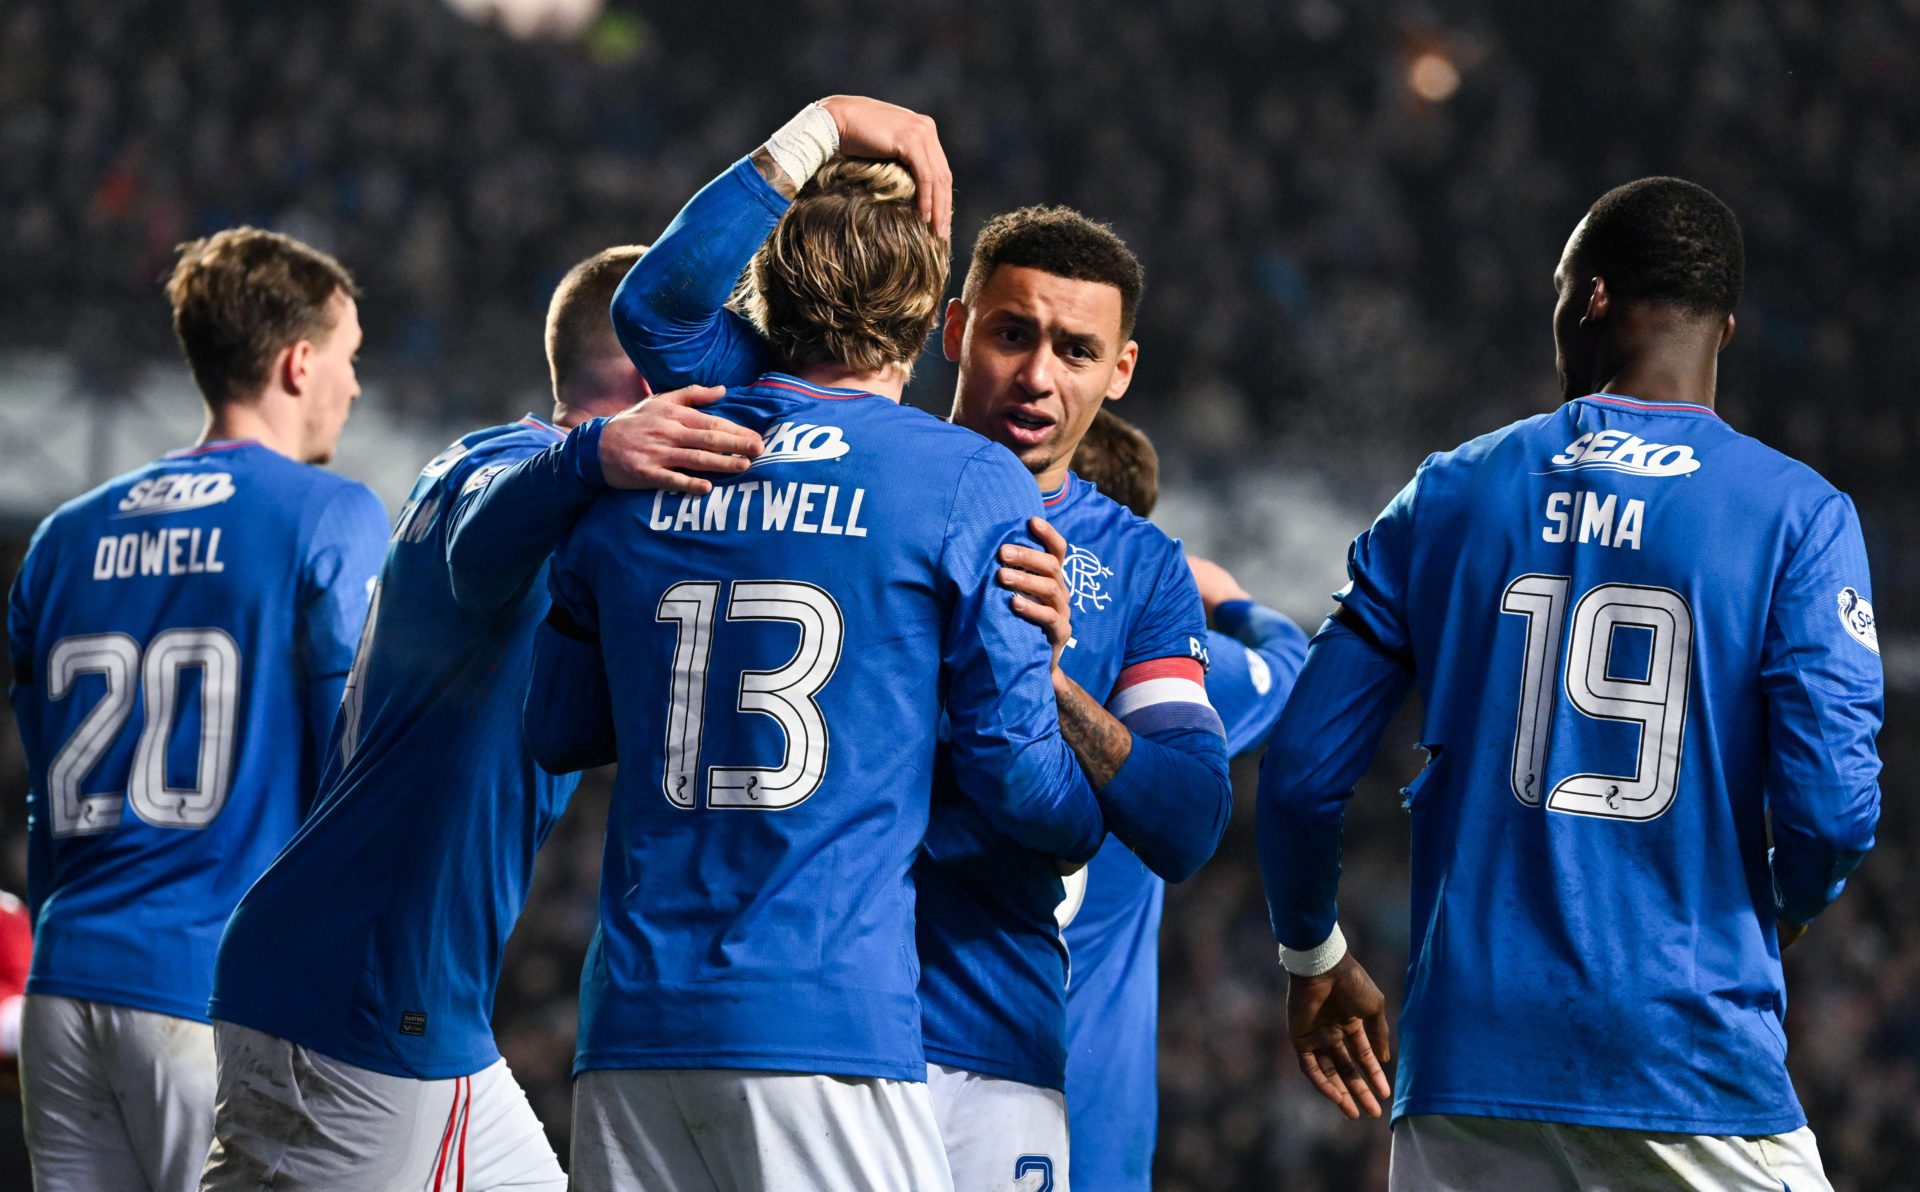 Rangers back on winning train with a victory over Killie